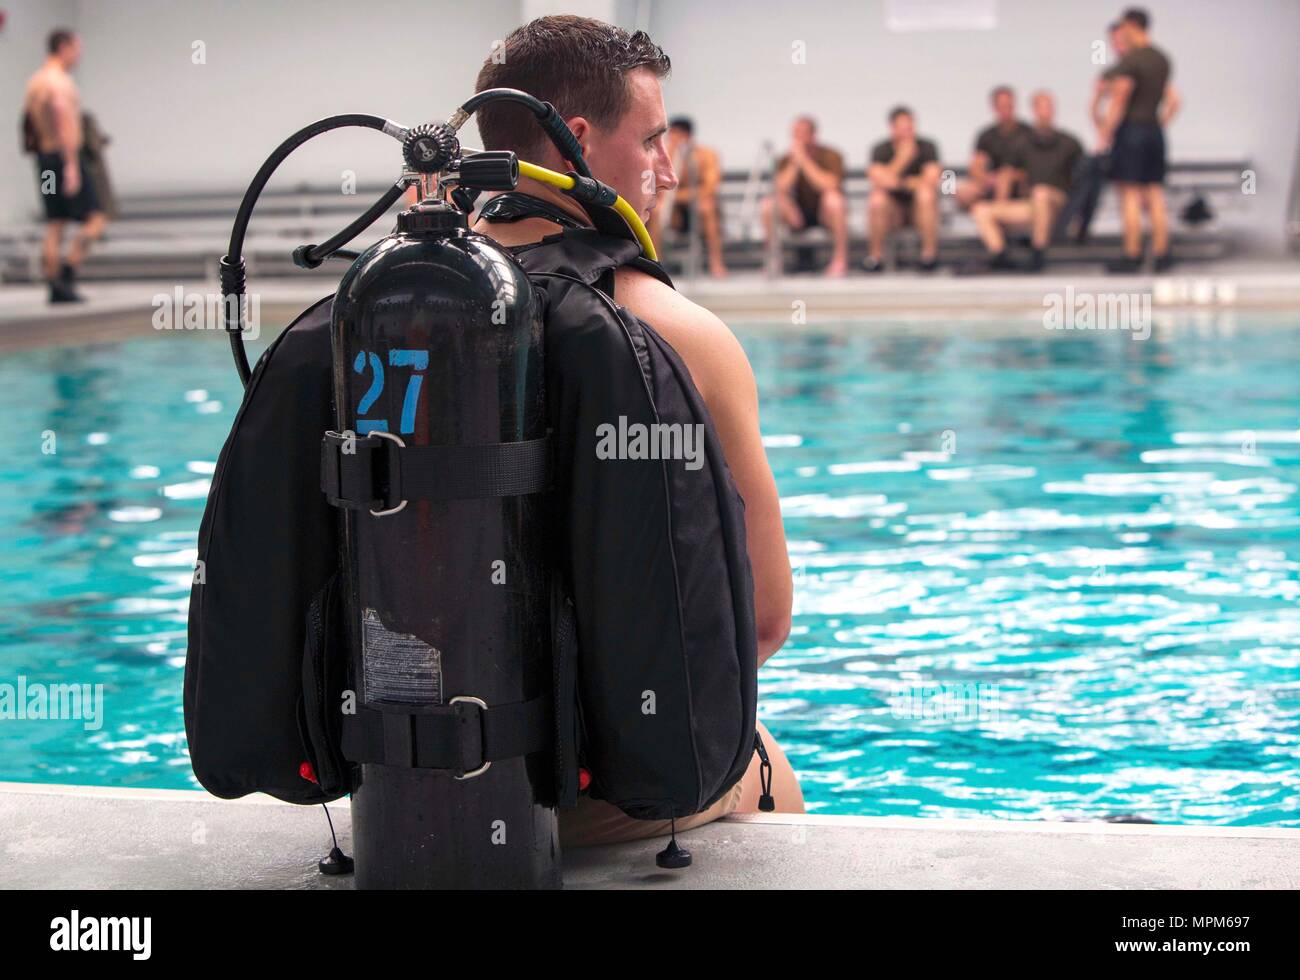 Sgt. Ryan Williams prepares to dive into the pool with a self-contained underwater breathing apparatus during a battalion training event at Camp Lejeune, N.C., March 23, 2017. The training helped Marines enhance their ability to operate in real-world scenarios with scuba gear. Williams is a reconnaissance Marine with 2nd Reconnaissance Battalion, 2nd Marine Division. (U.S. Marine Corps photo by Sgt. Clemente C. Garcia) Stock Photo